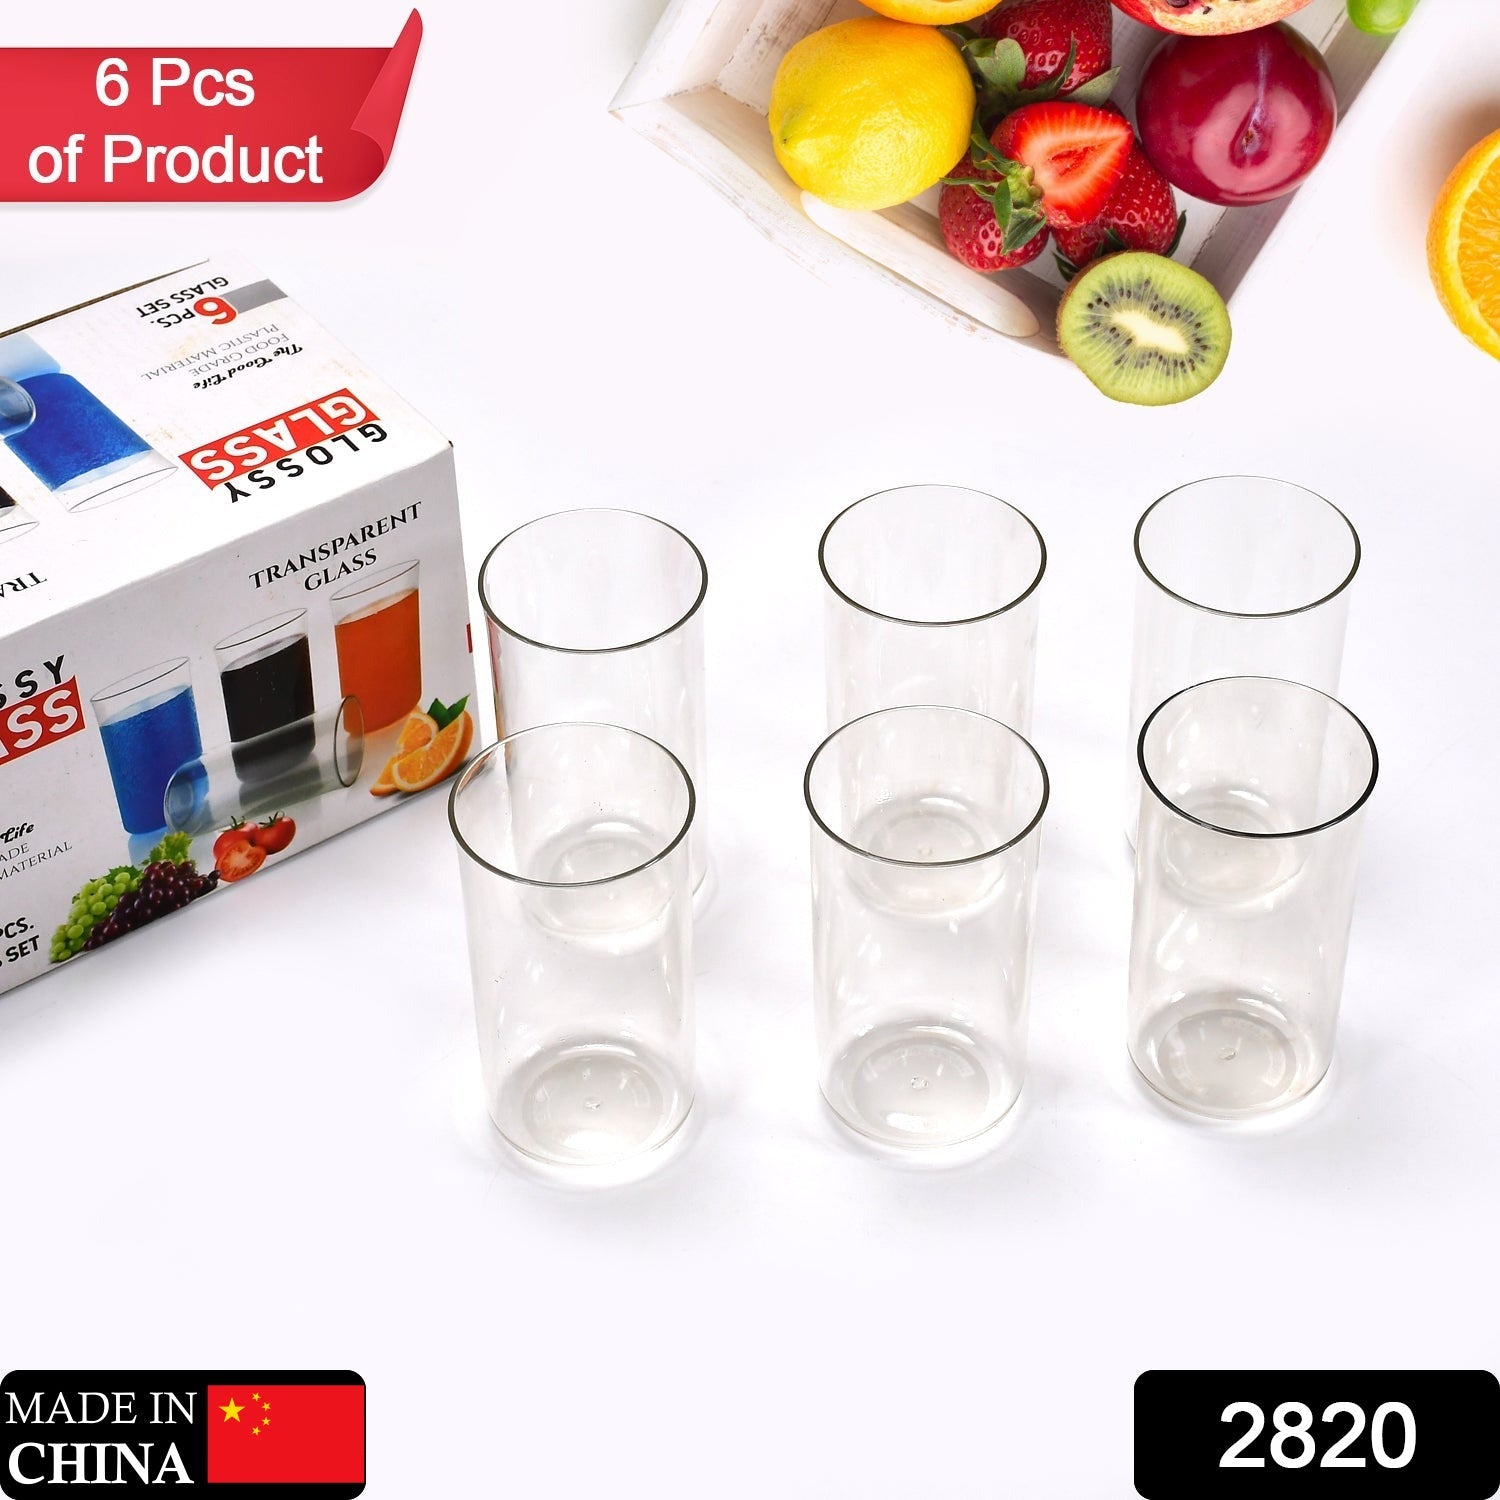 2820 6 Pcs Large Glass used in all kinds of kitchen and official purposes for drinking water and beverages etc.